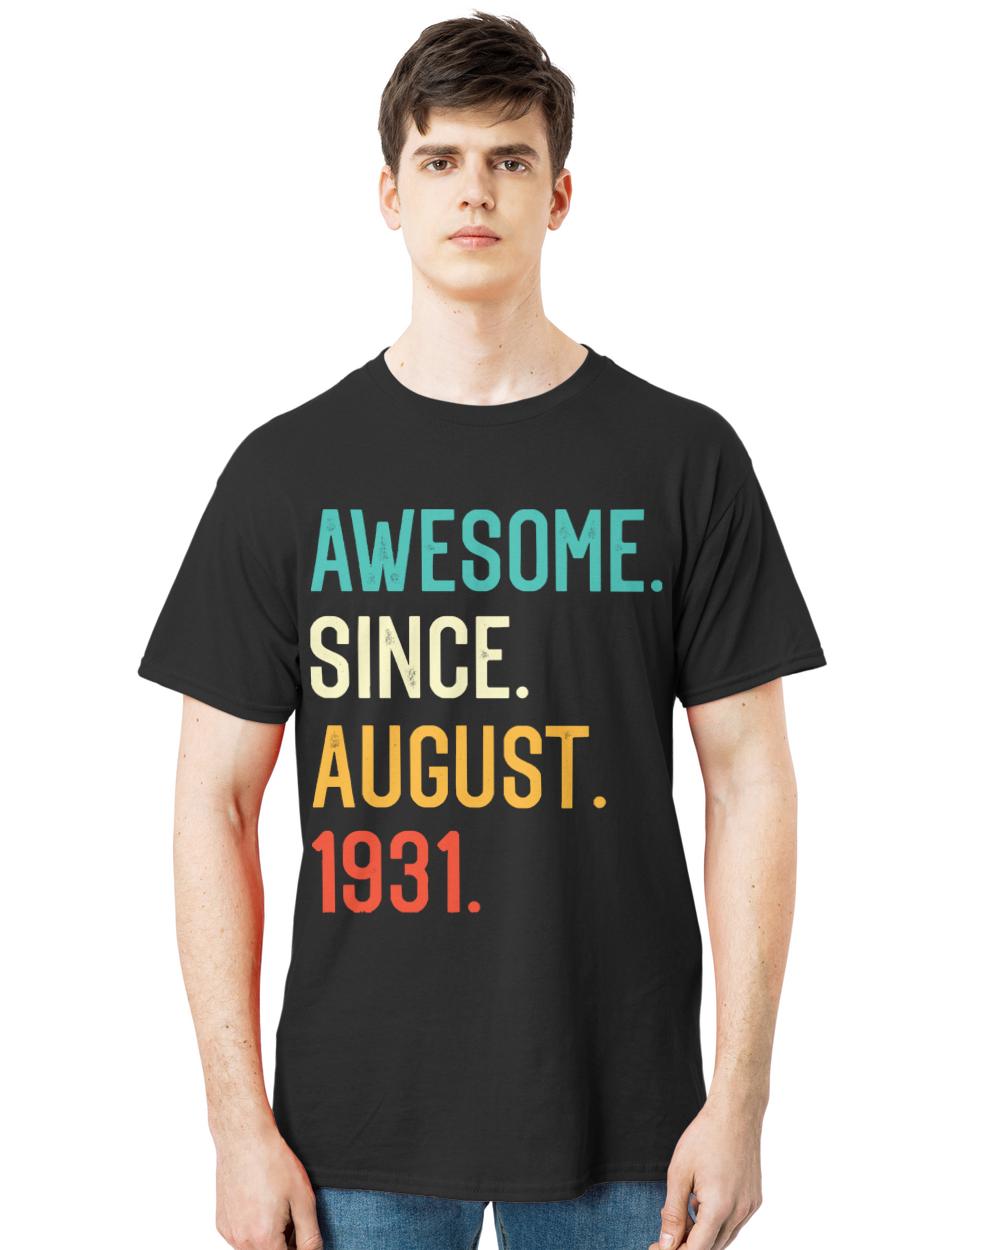 Awesome Since 1931 T- Shirt Awesome Since August 1931 T- Shirt